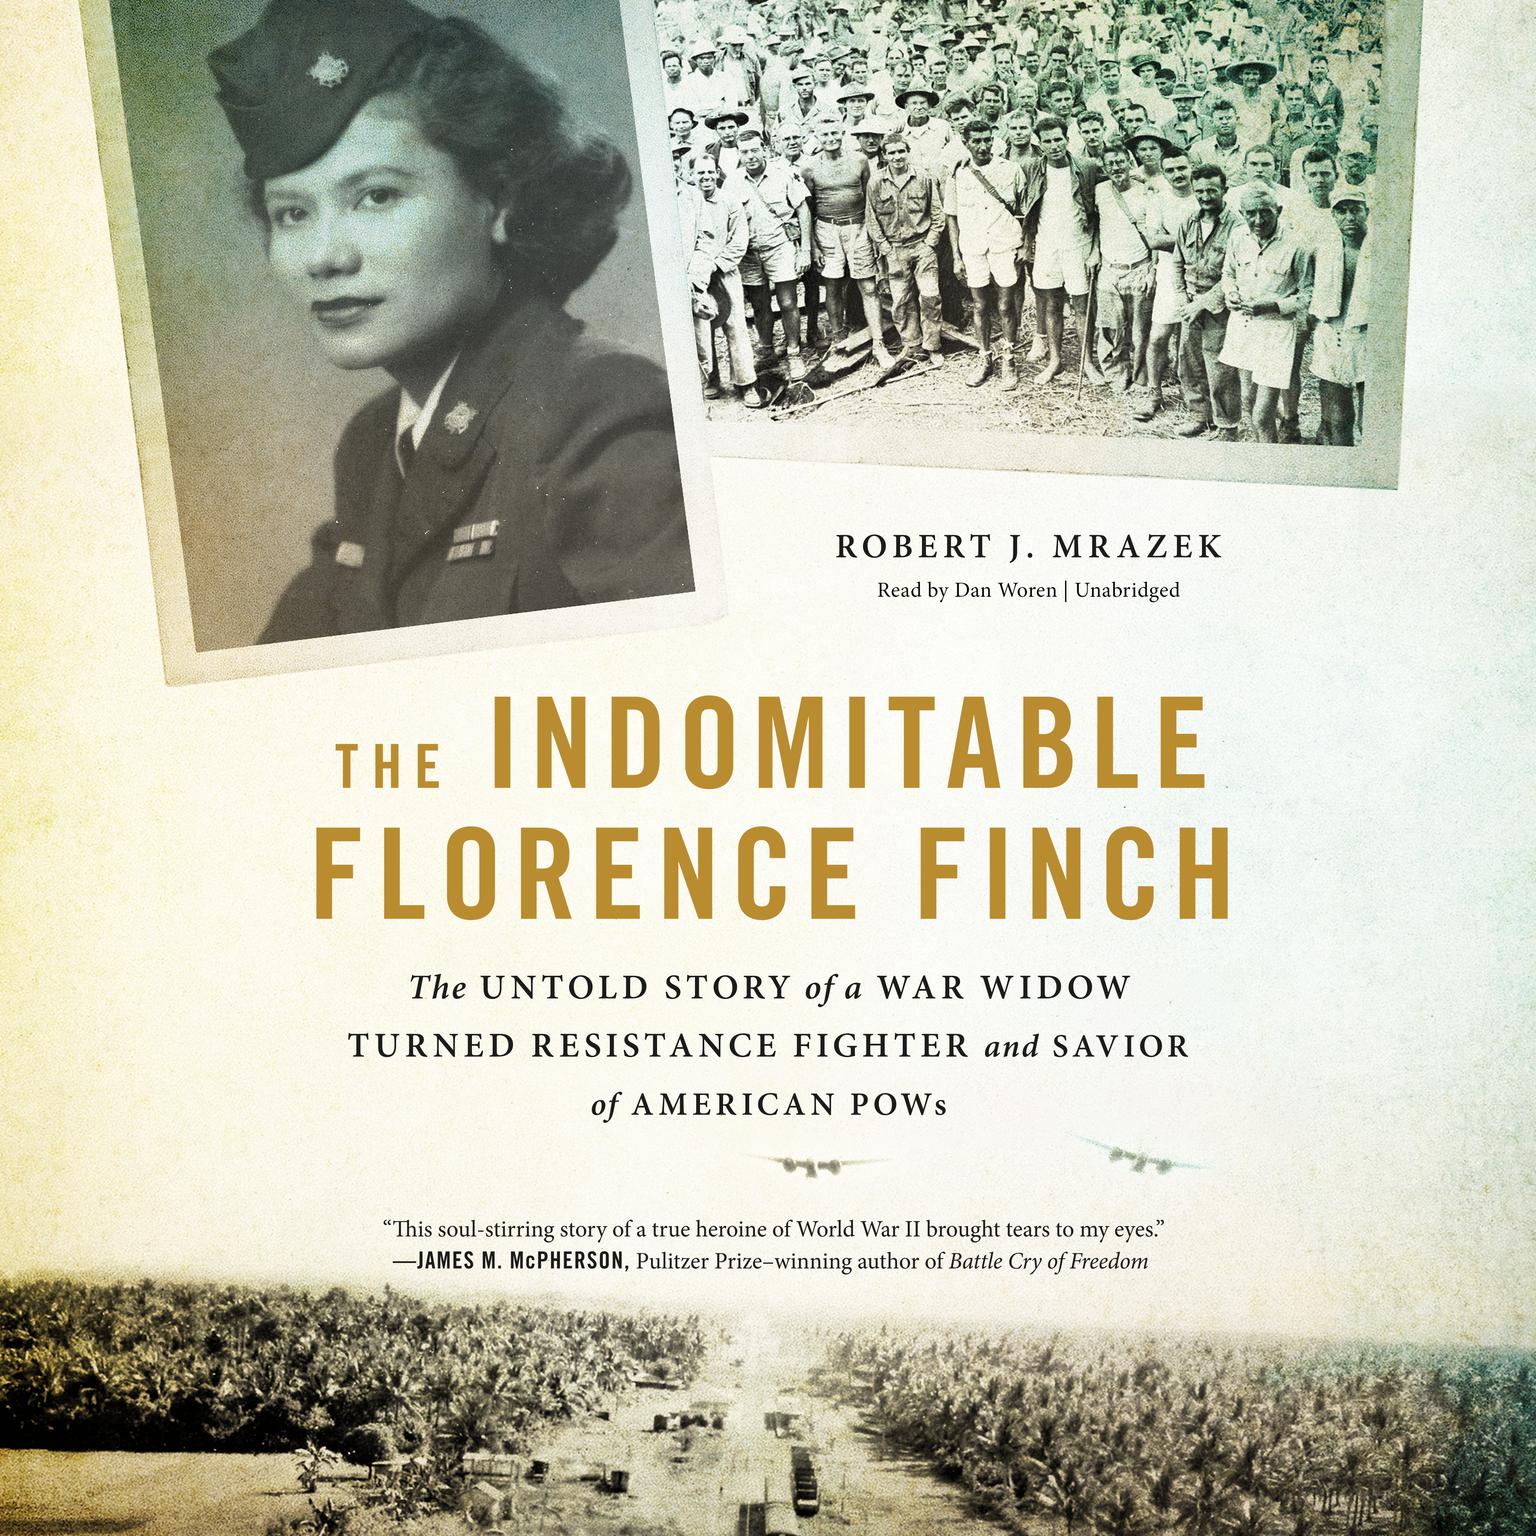 The Indomitable Florence Finch: The Untold Story of a War Widow Turned Resistance Fighter and Savior of American POWs Audiobook, by Robert J. Mrazek